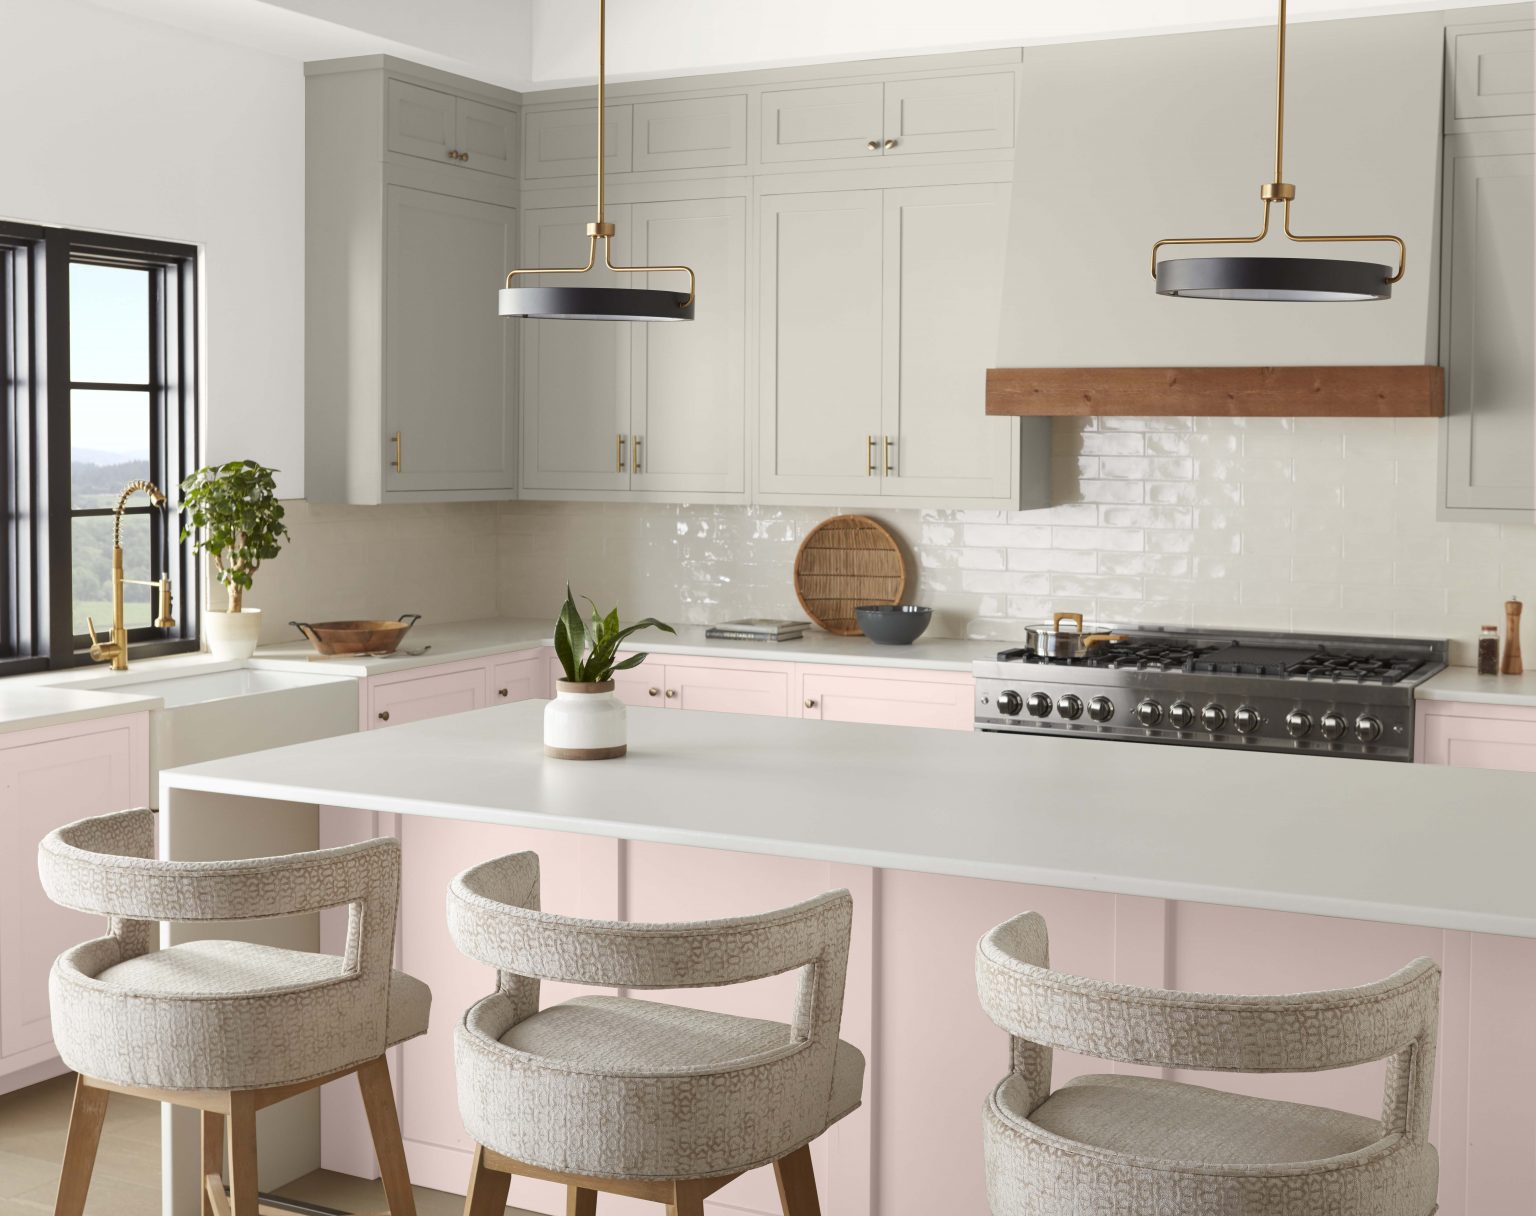 A contemporary kitchen with upper cabinets painted in a light grey colour and bottom cabinets and the island painted in a neutral light pink colour  